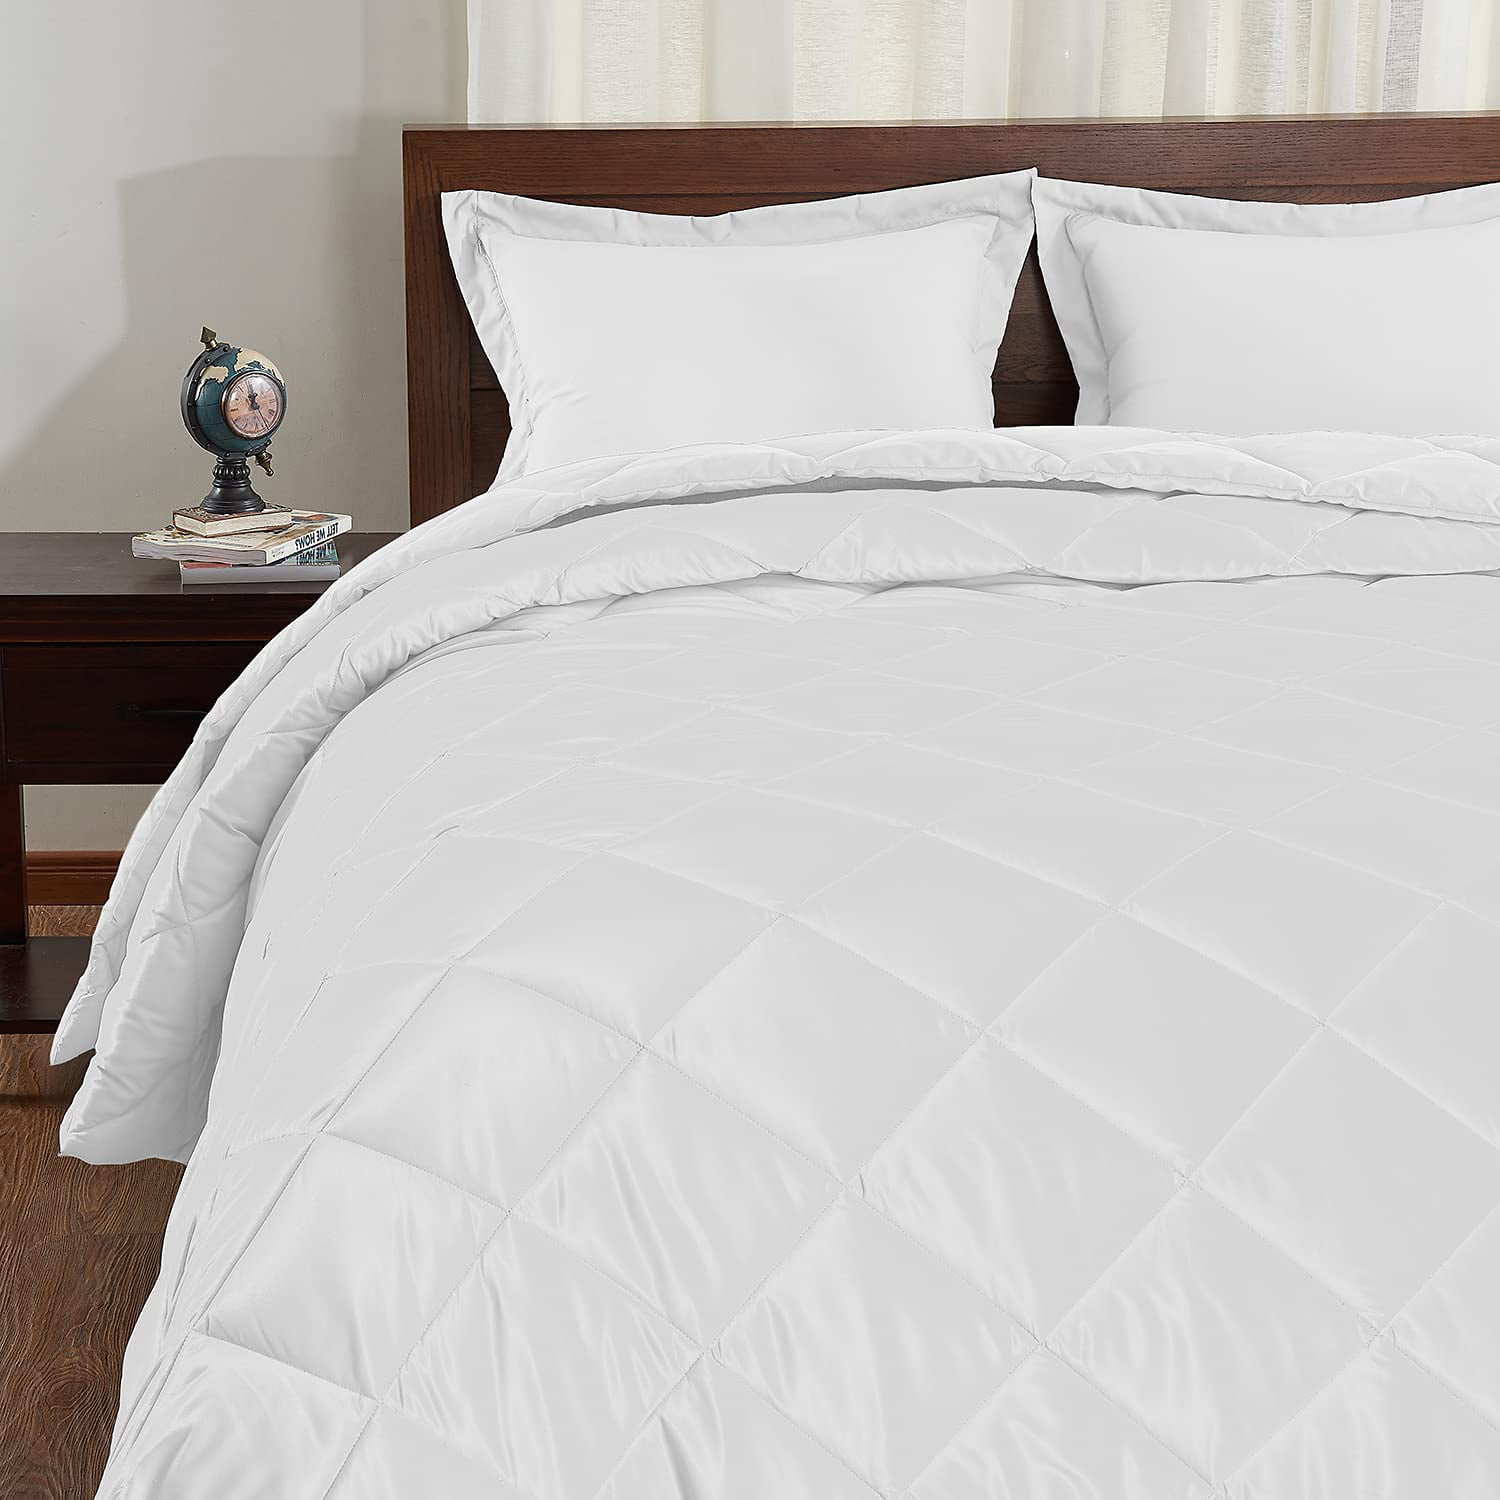 Details about   Down Alternative White Comforter Set with Shams All Season Queen Size Bedding US 